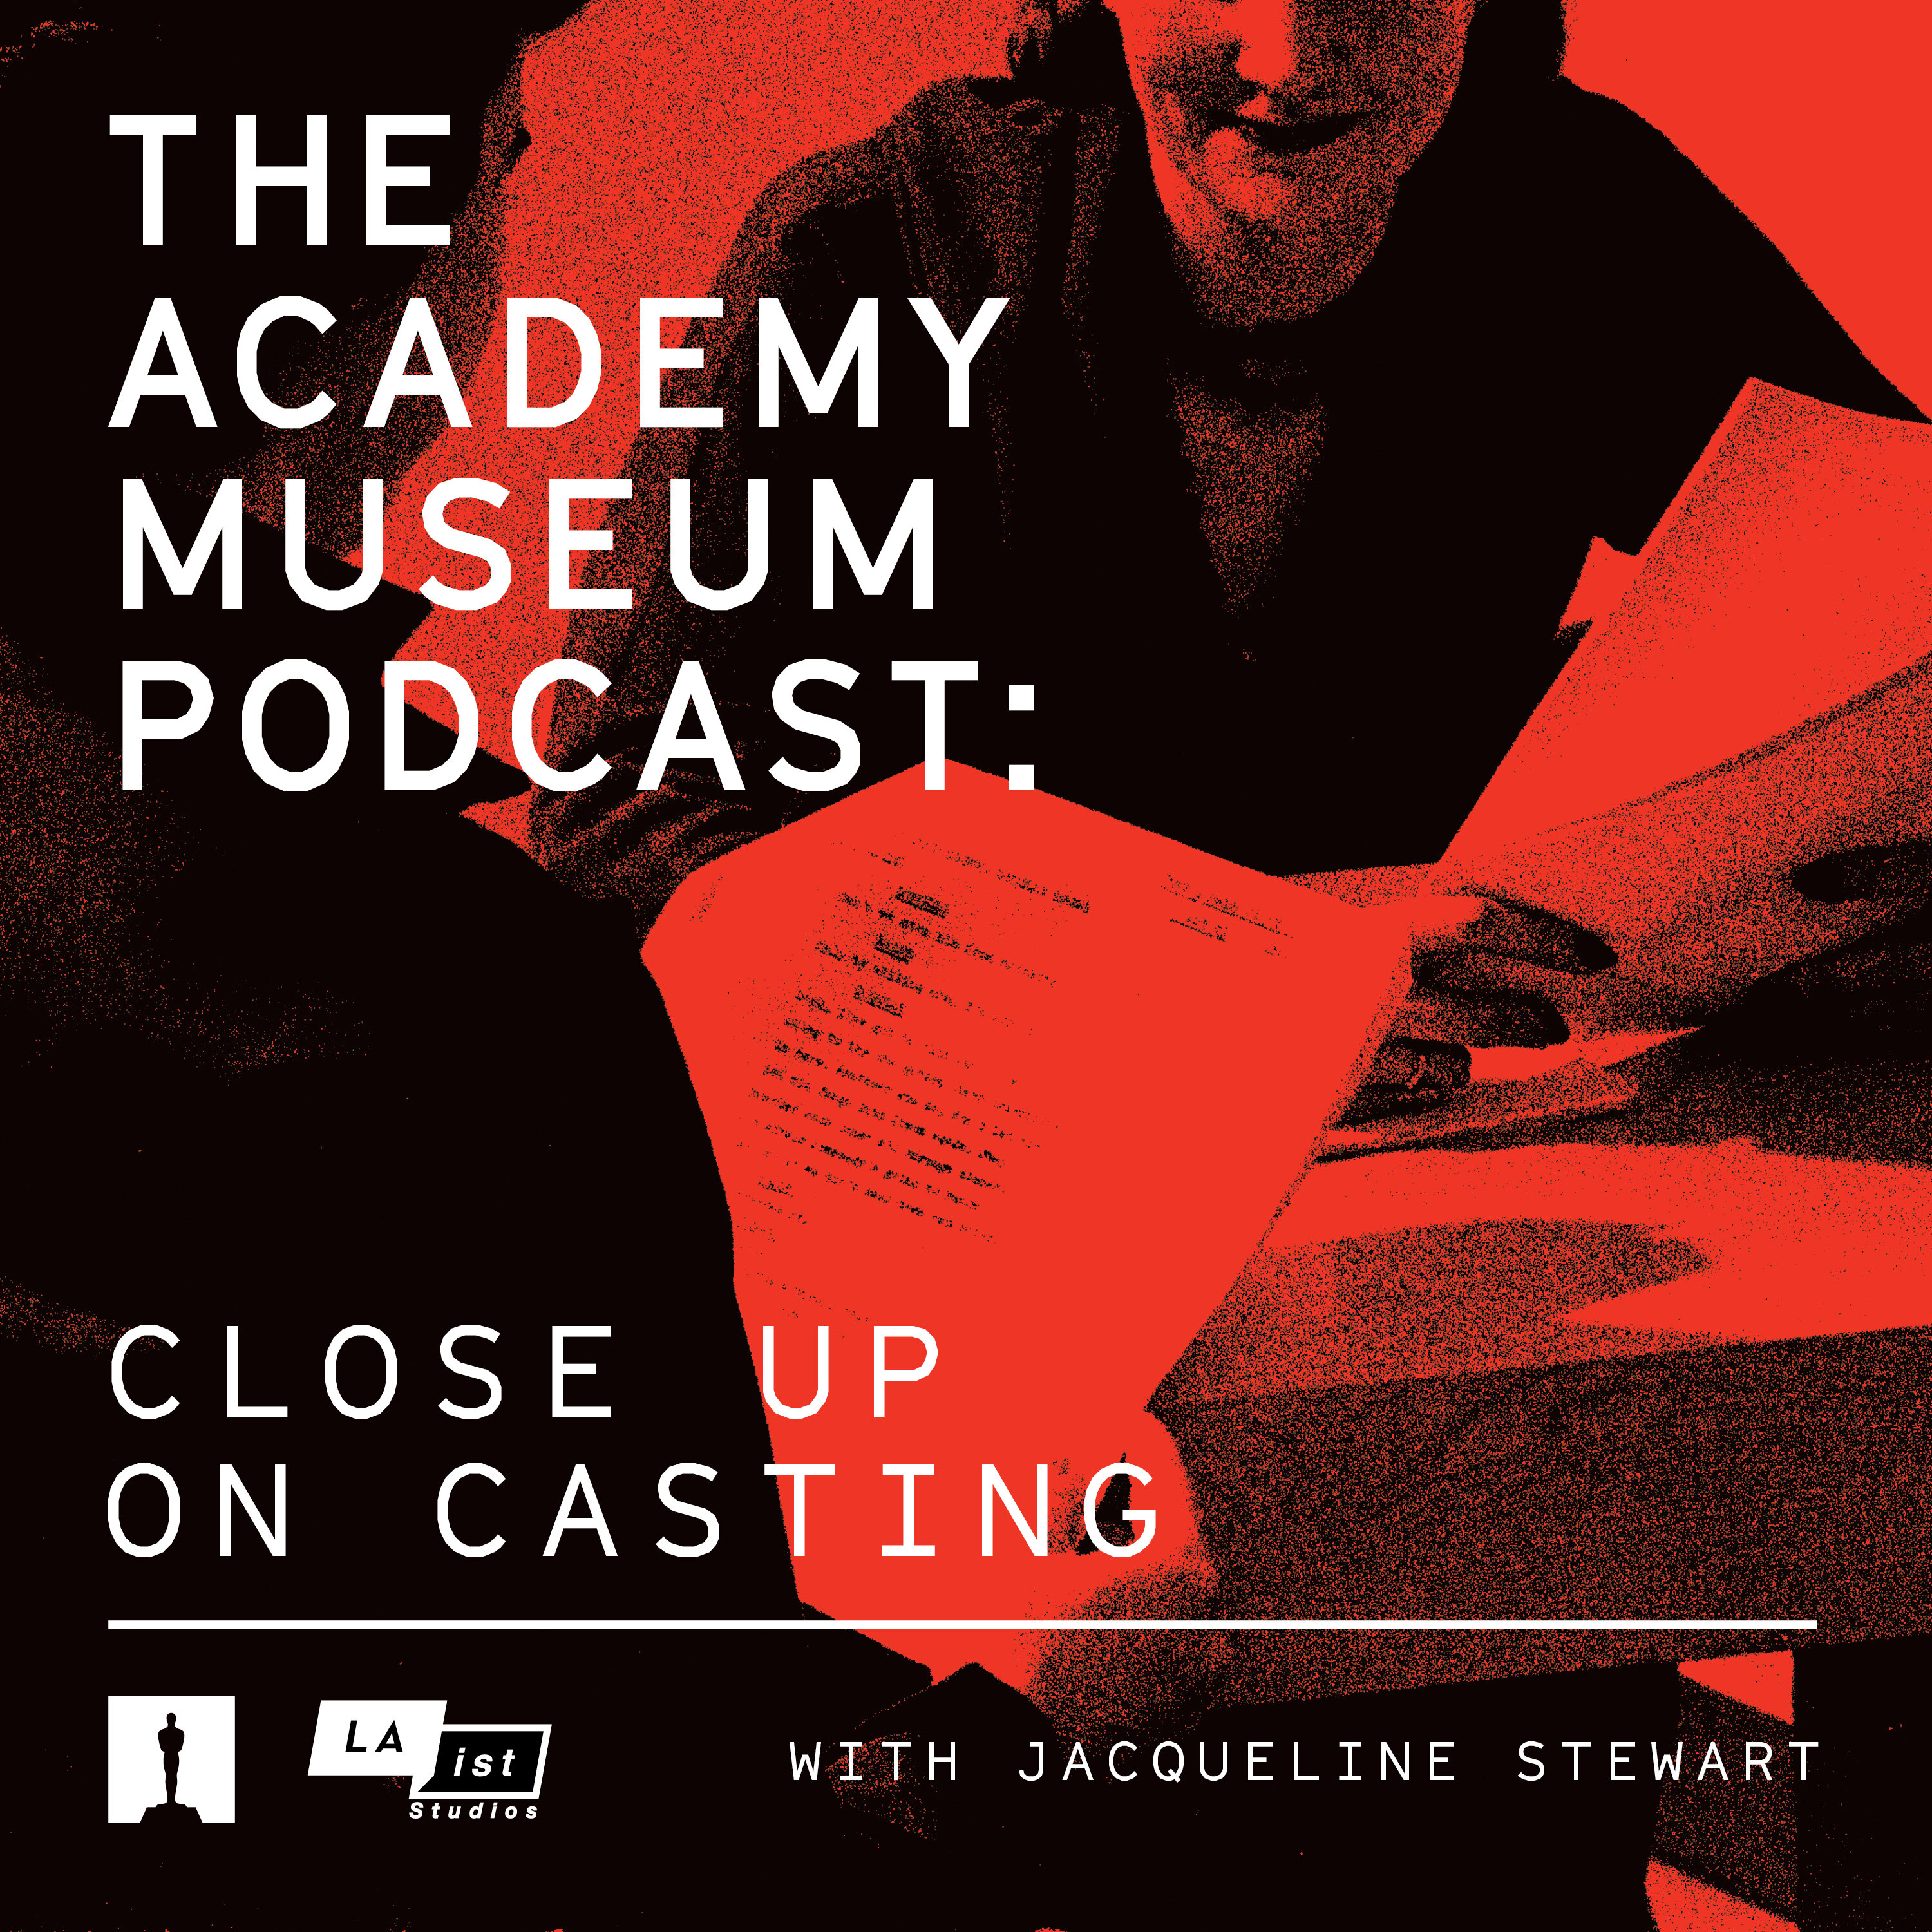 The Academy Museum Podcast podcast show image